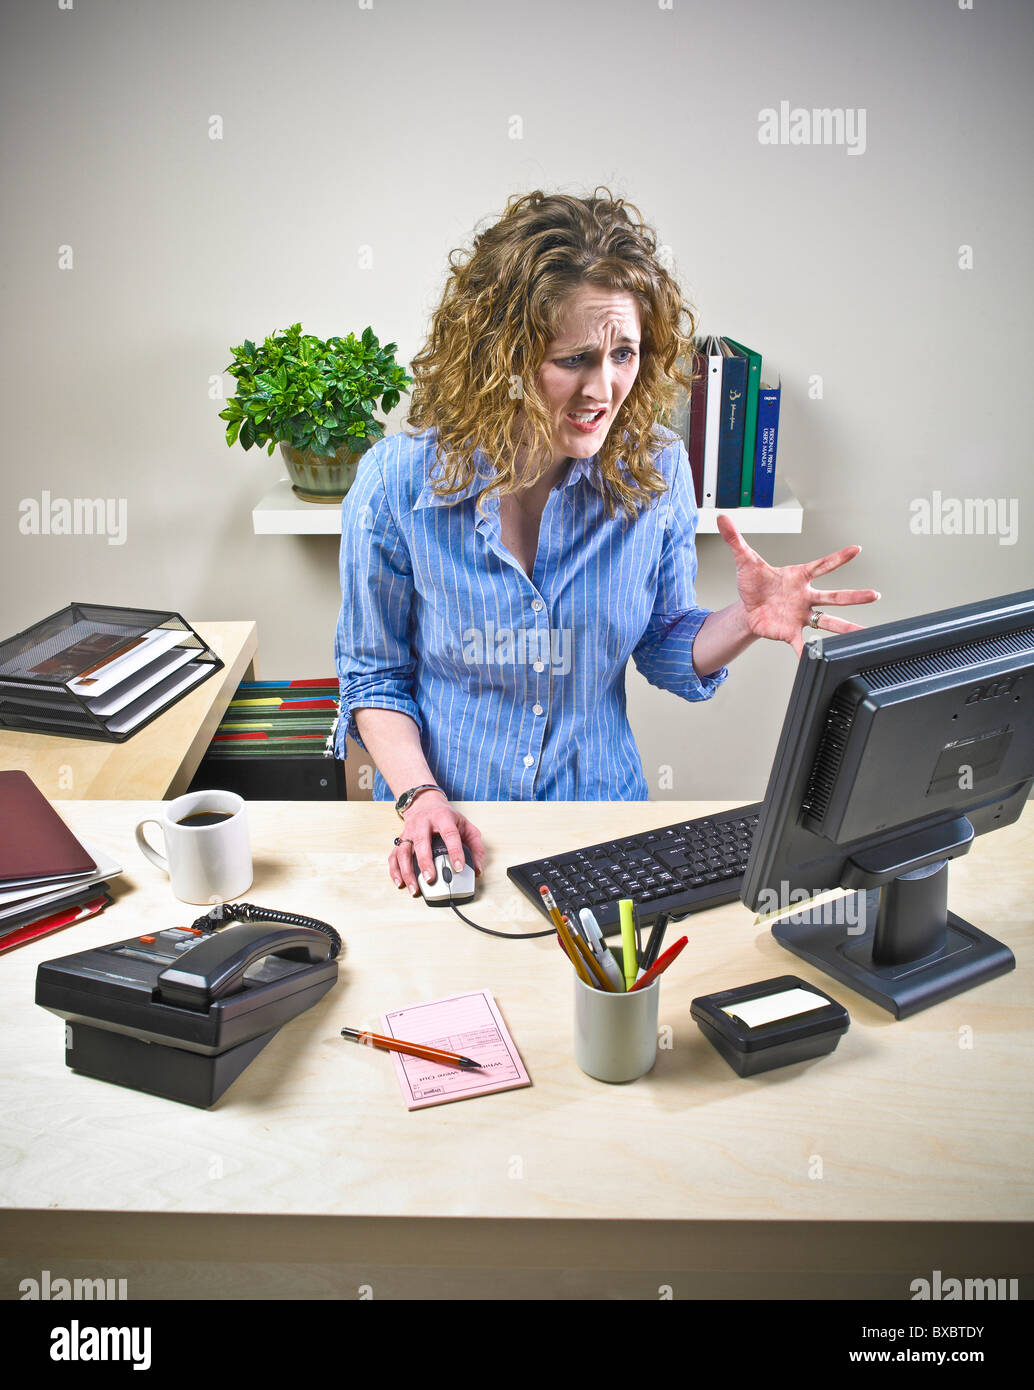 Female secretary, executive, office worker at computer desk. stressful situation. Unorganized. Stock Photo